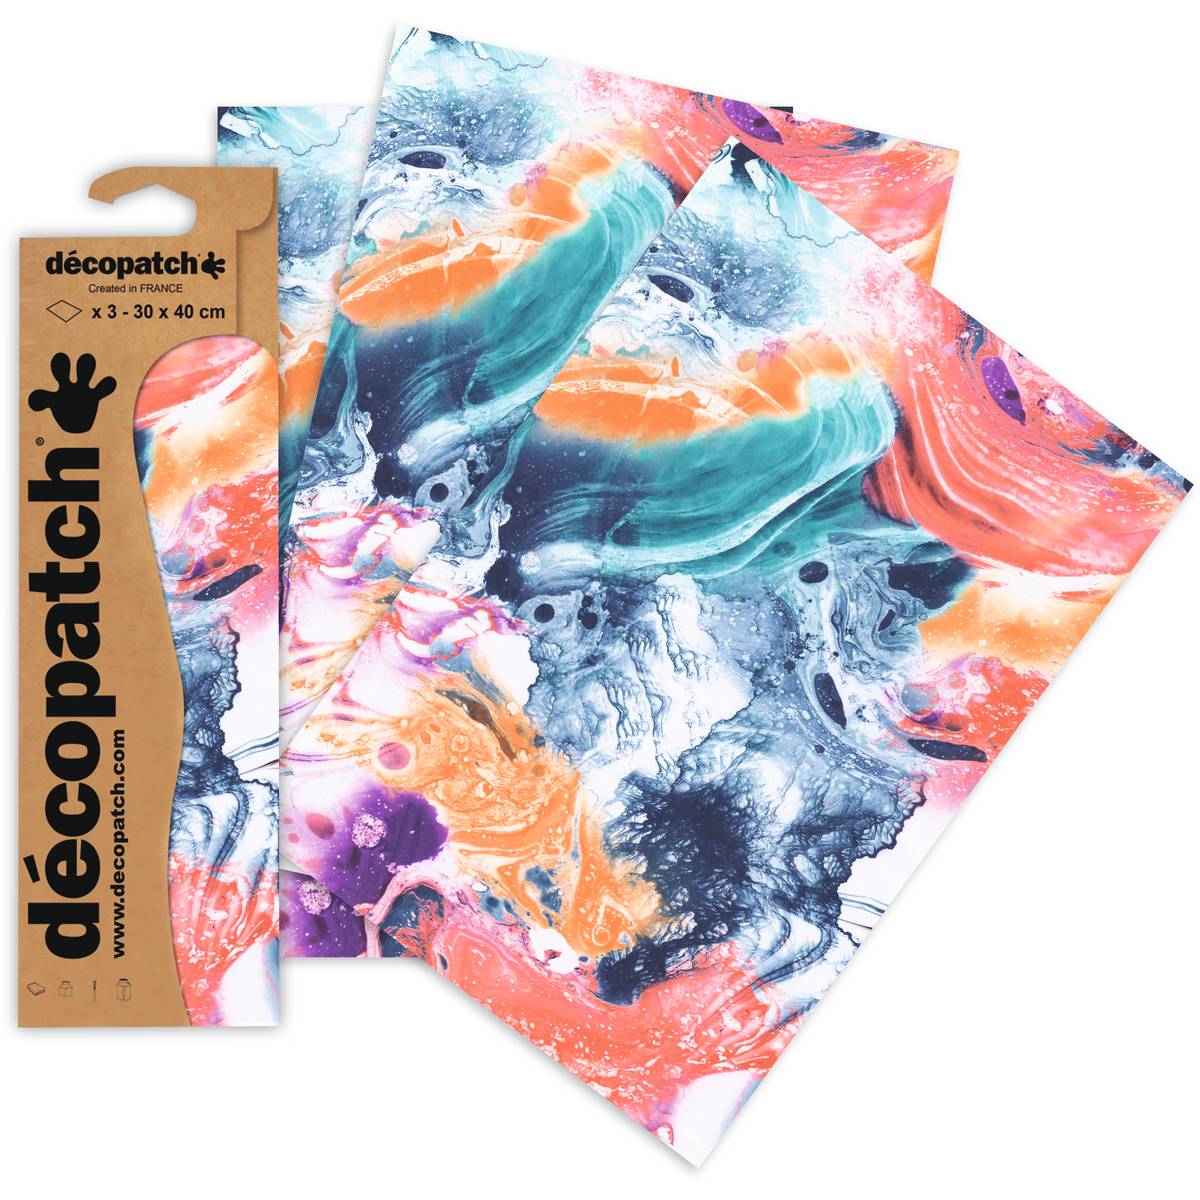 Decopatch marble brights decoupage paper – Hobbycraft